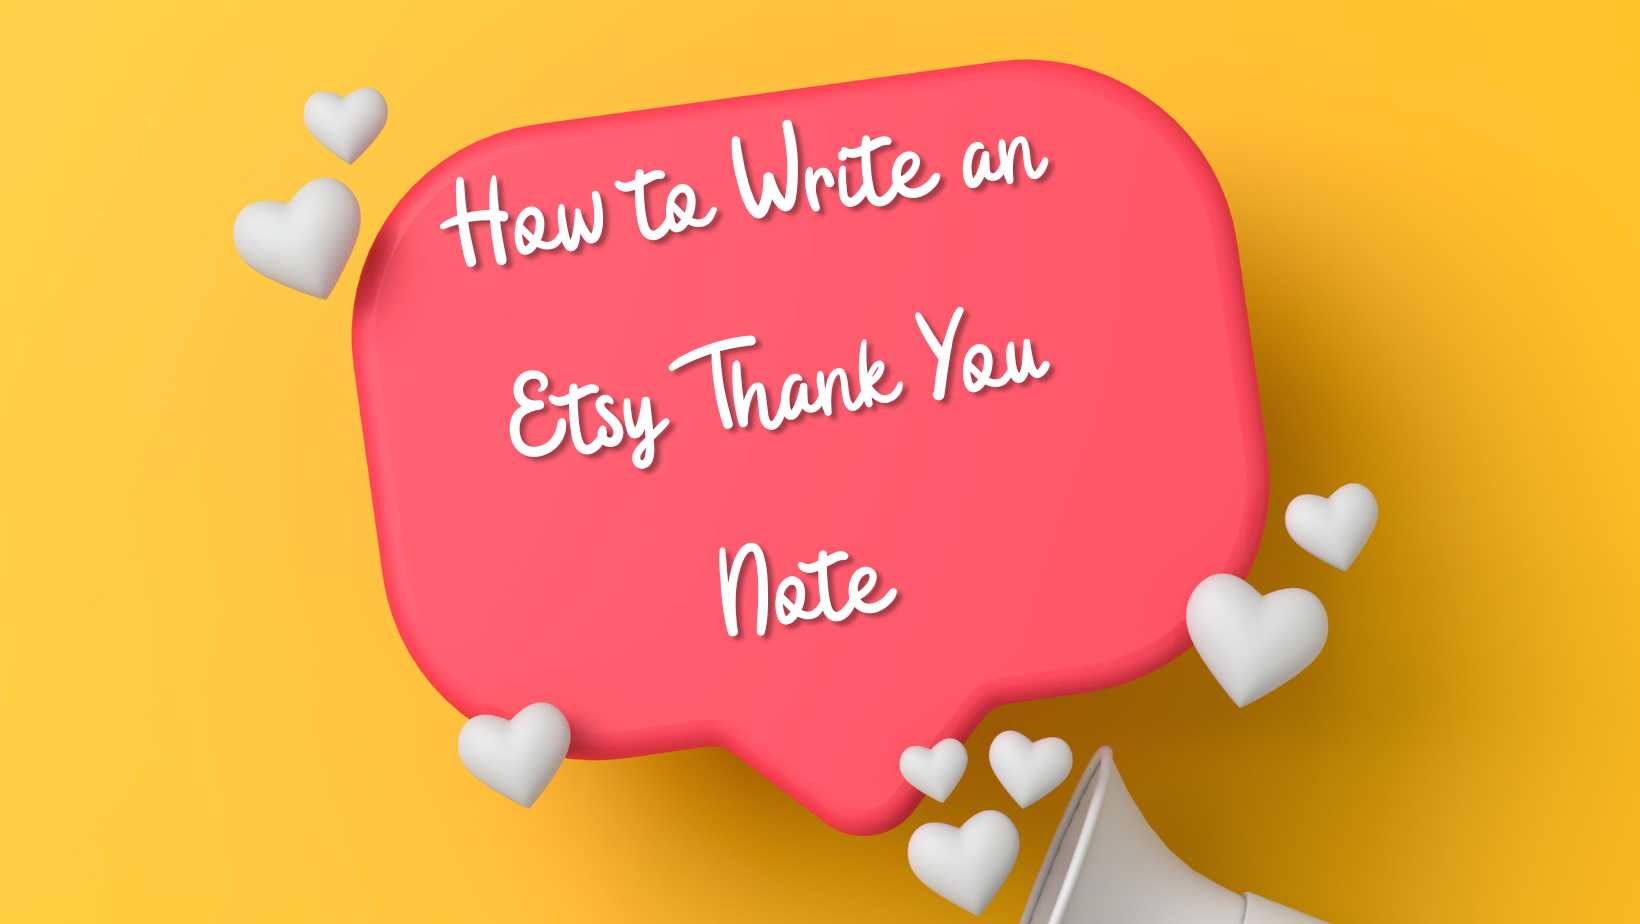 How to Write an Etsy Thank You Note